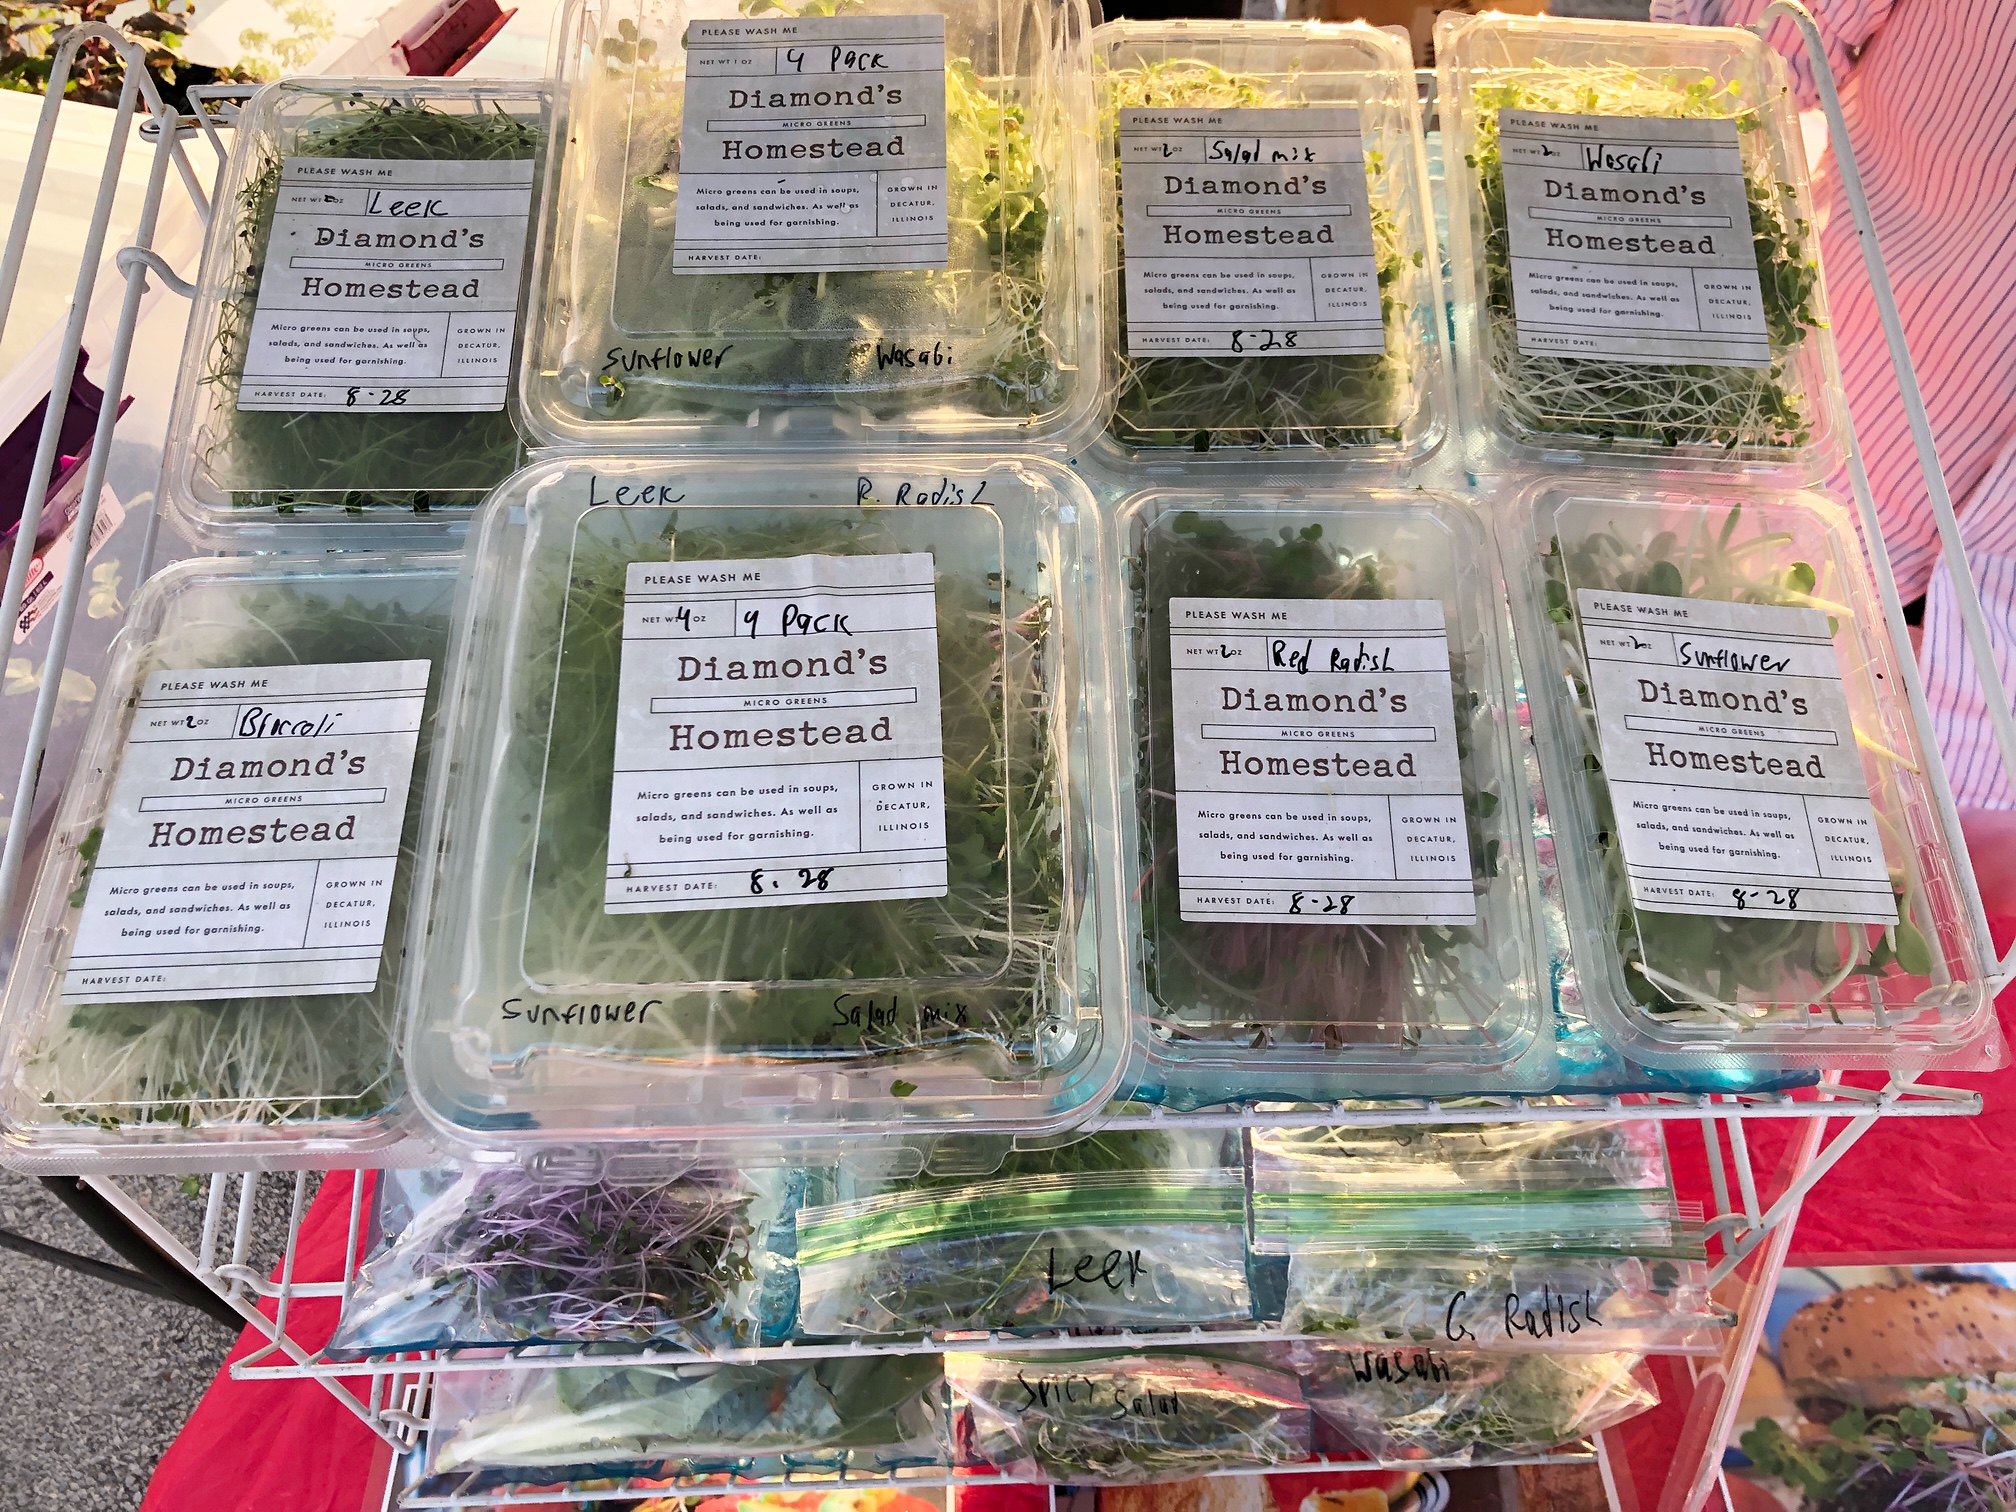 On a tiered, white plastic stand, there are many plastic clamshell containers filled with microgreens from Diamond's Homestead. Photo by Alyssa Buckley.